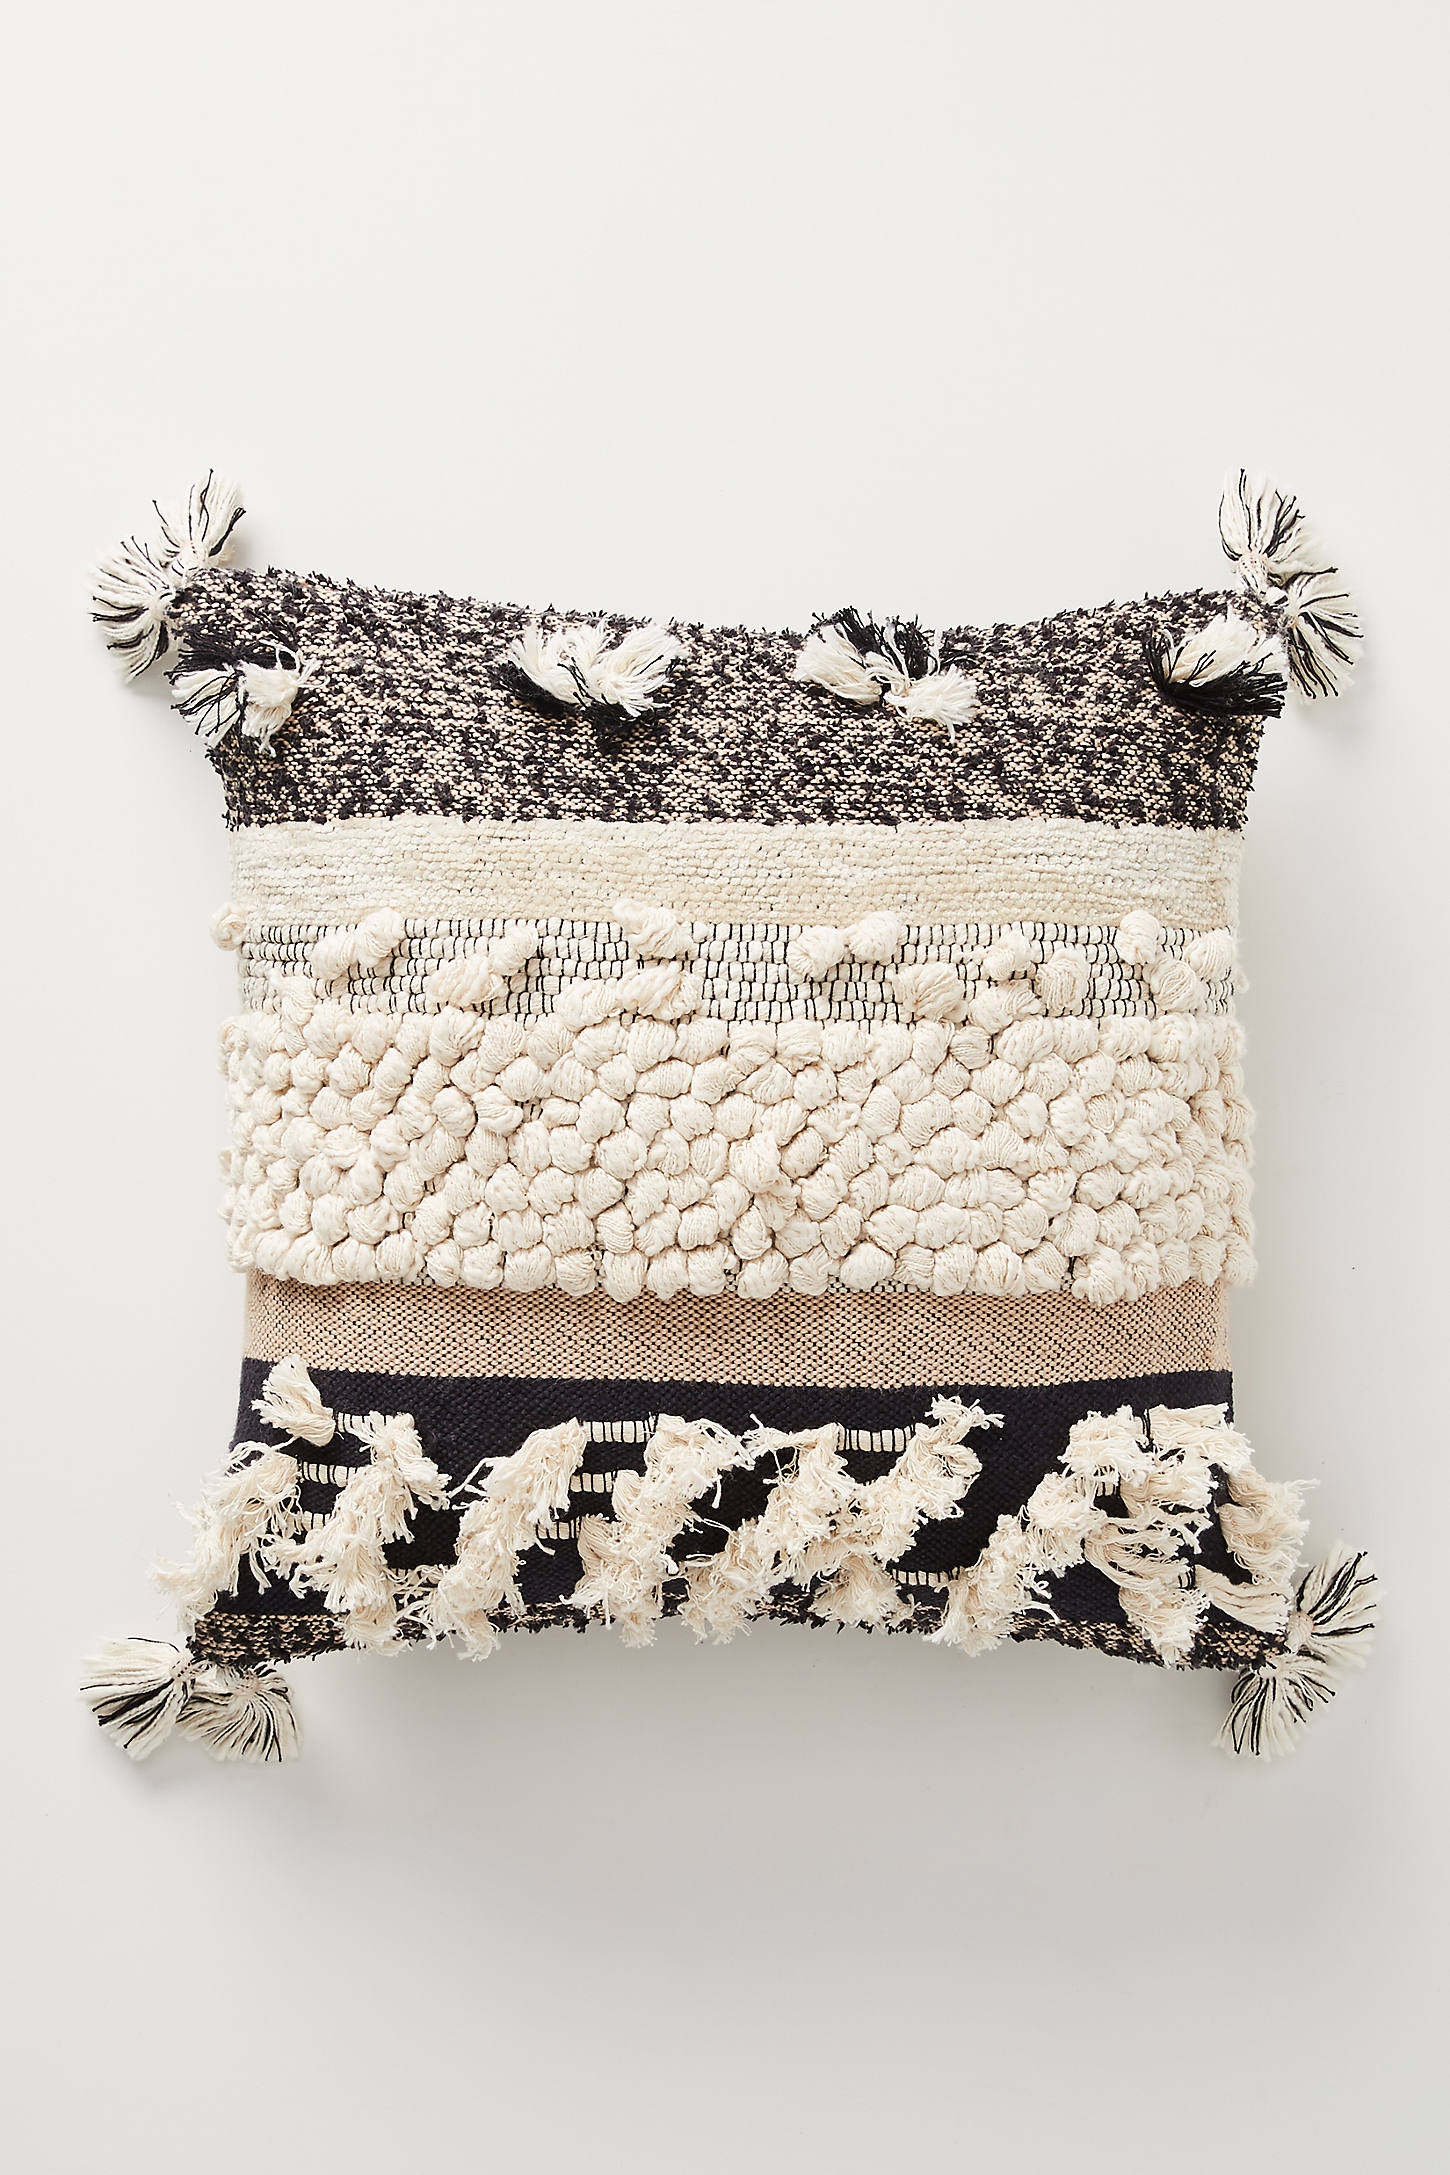 All Roads Yucca Pillow By All Roads Design in Black Size 18" SQ - Image 0